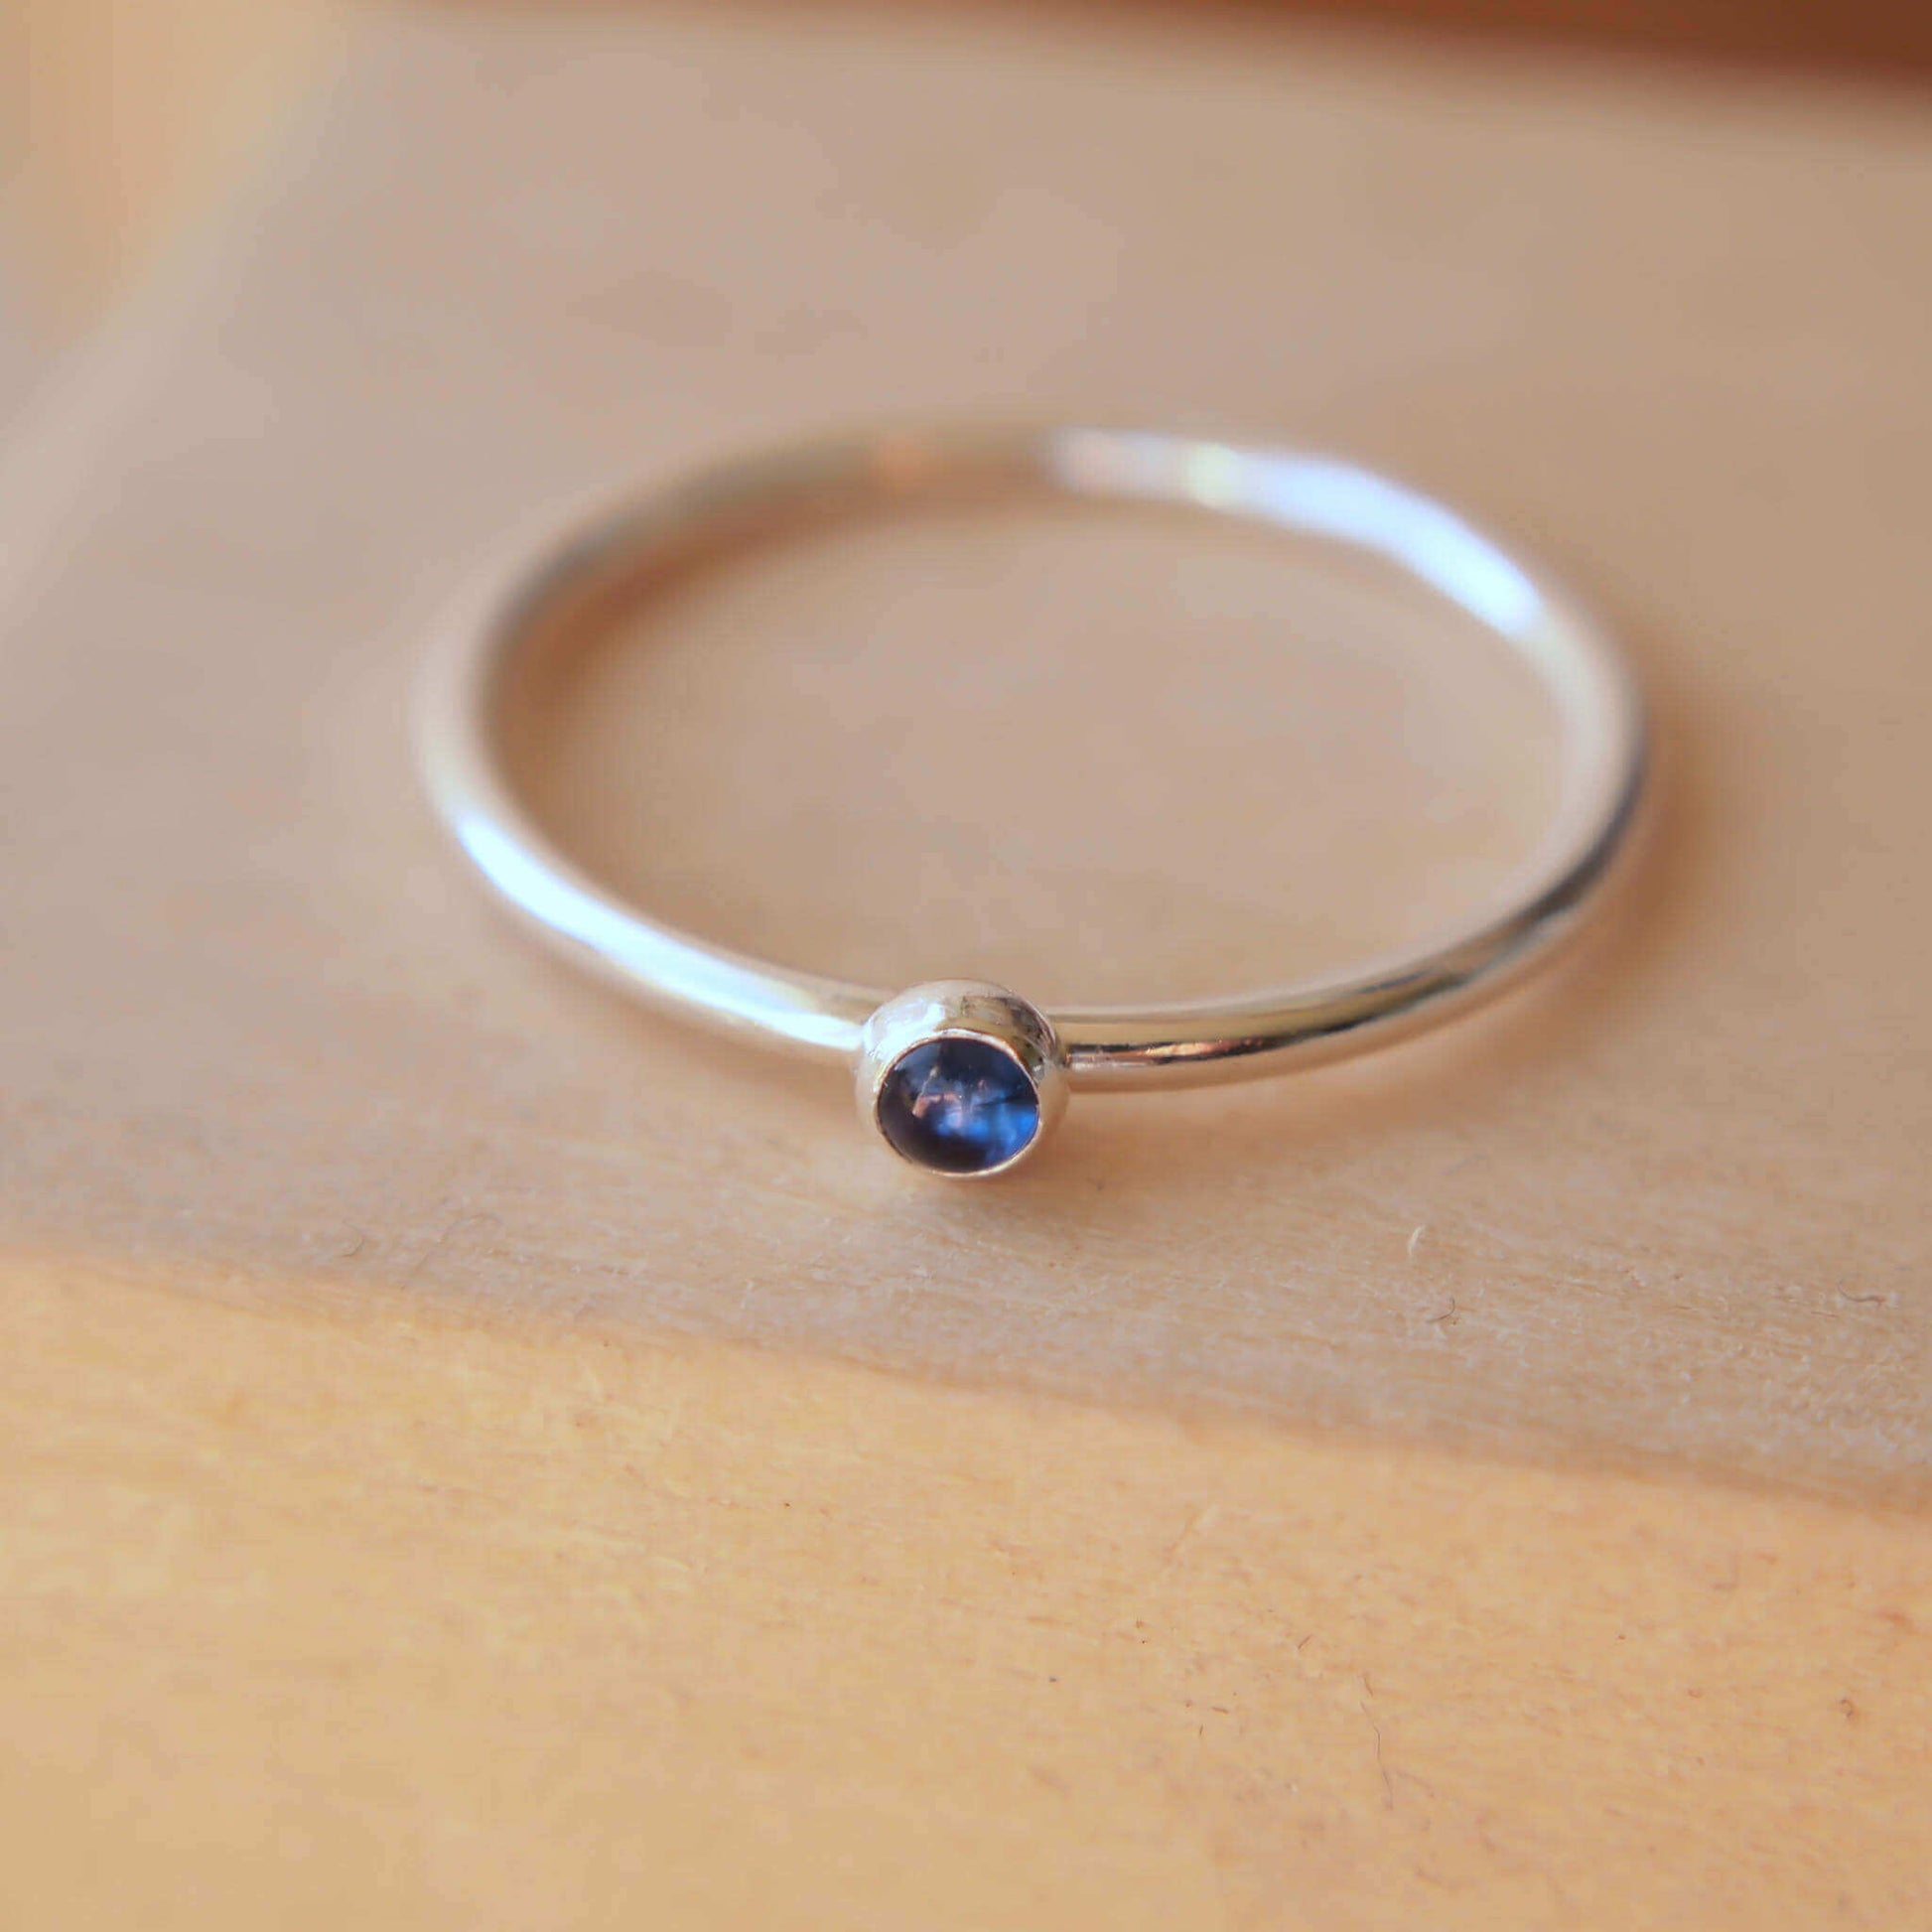 Silver and Sapphire gemstone ring